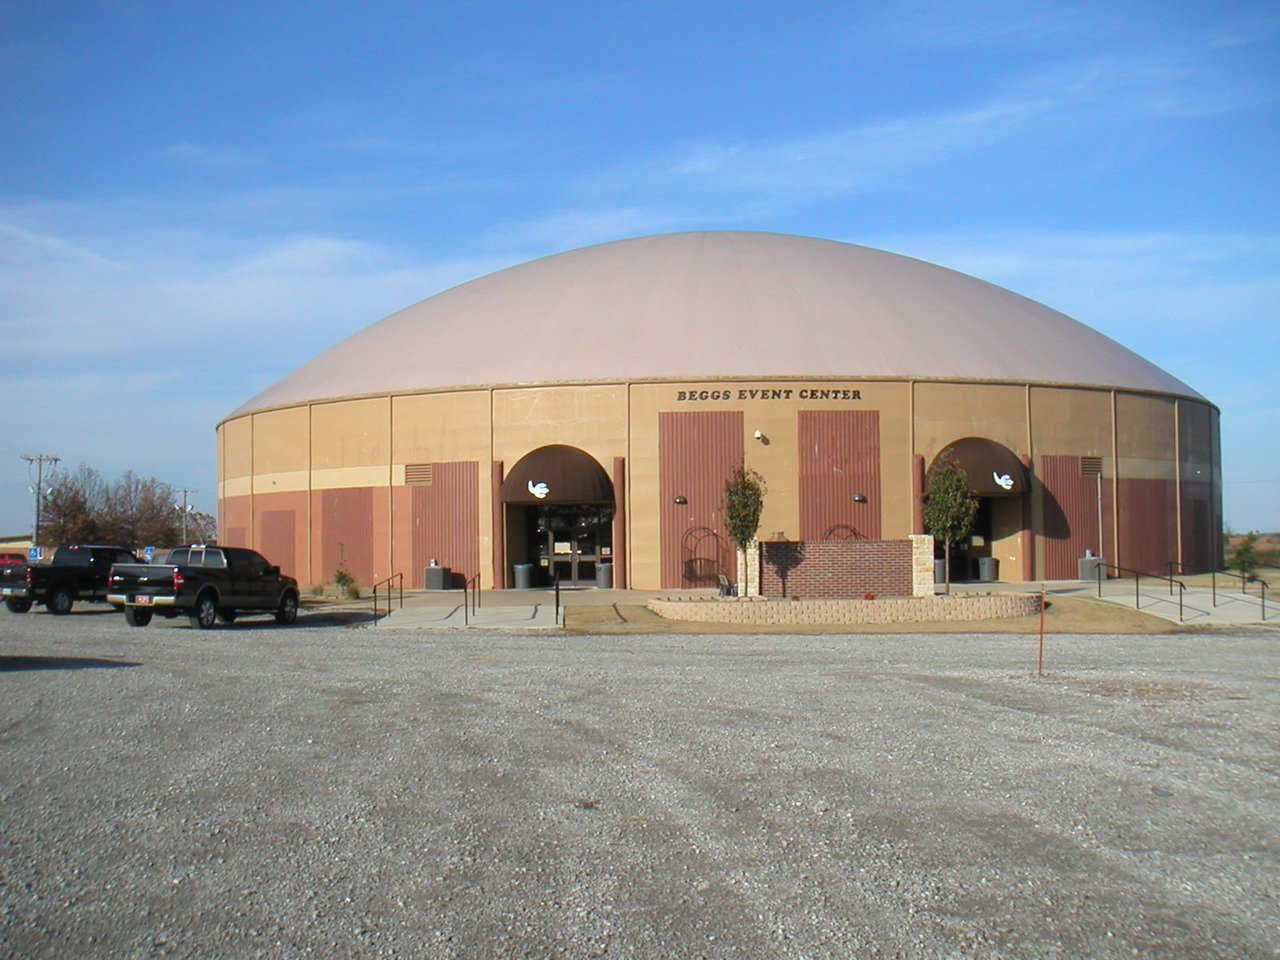 Beggs, Oklahoma Event Center — Beggs built two Monolithic Domes: A 160’ diameter gymnasium/event center built on a 24’ Orion wall; a 112’ diameter dome on a 12’ Orion wall that provides nine additional classrooms, offices and a student commons area.
  See: http://www.monolithic.com/stories/beggshighschool